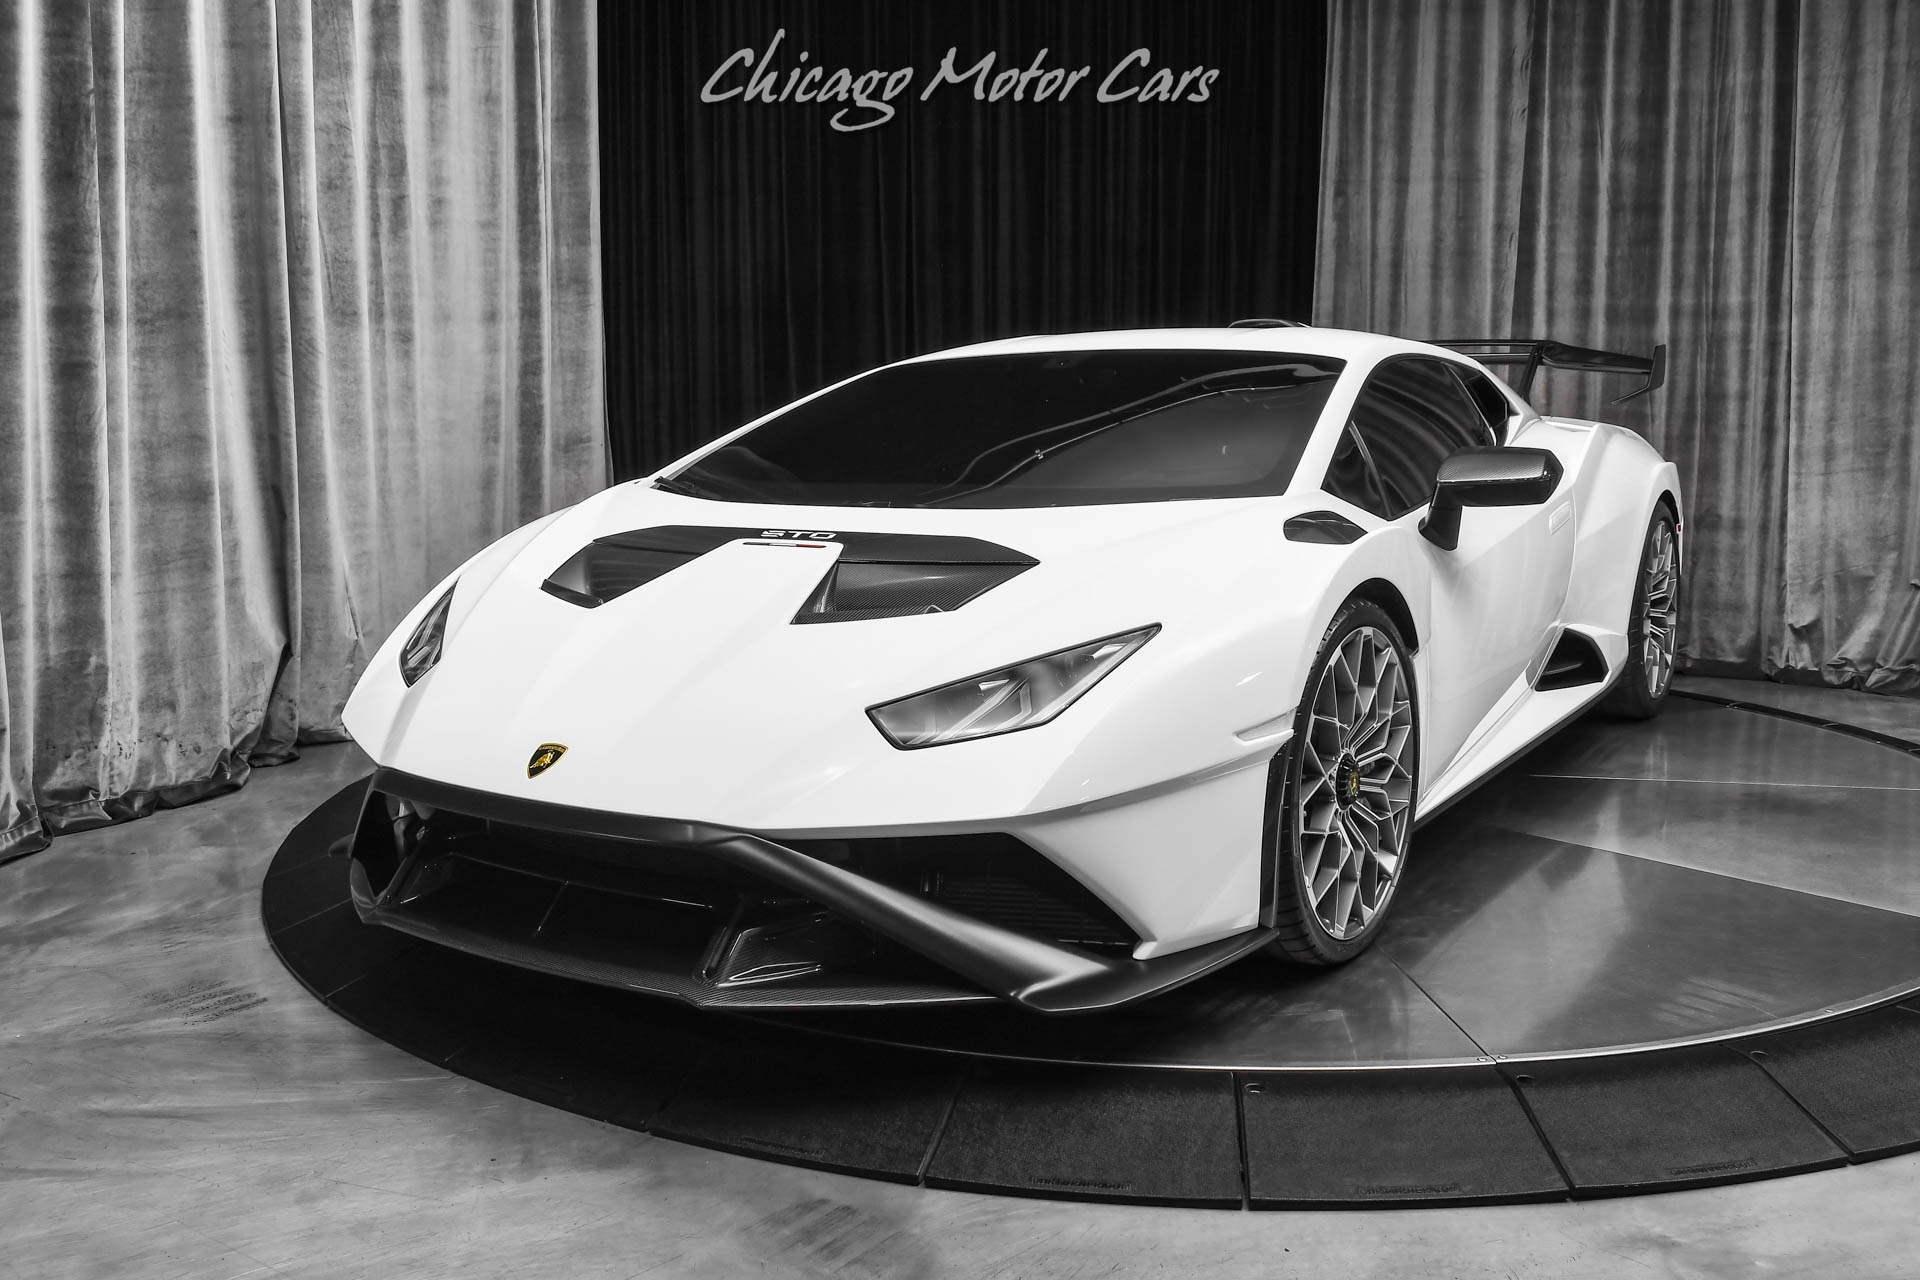 Used-2021-Lamborghini-Huracan-STO-Coupe-Only-157-Miles-Full-Exterior-Carbon-Pack-Full-Front-PPF